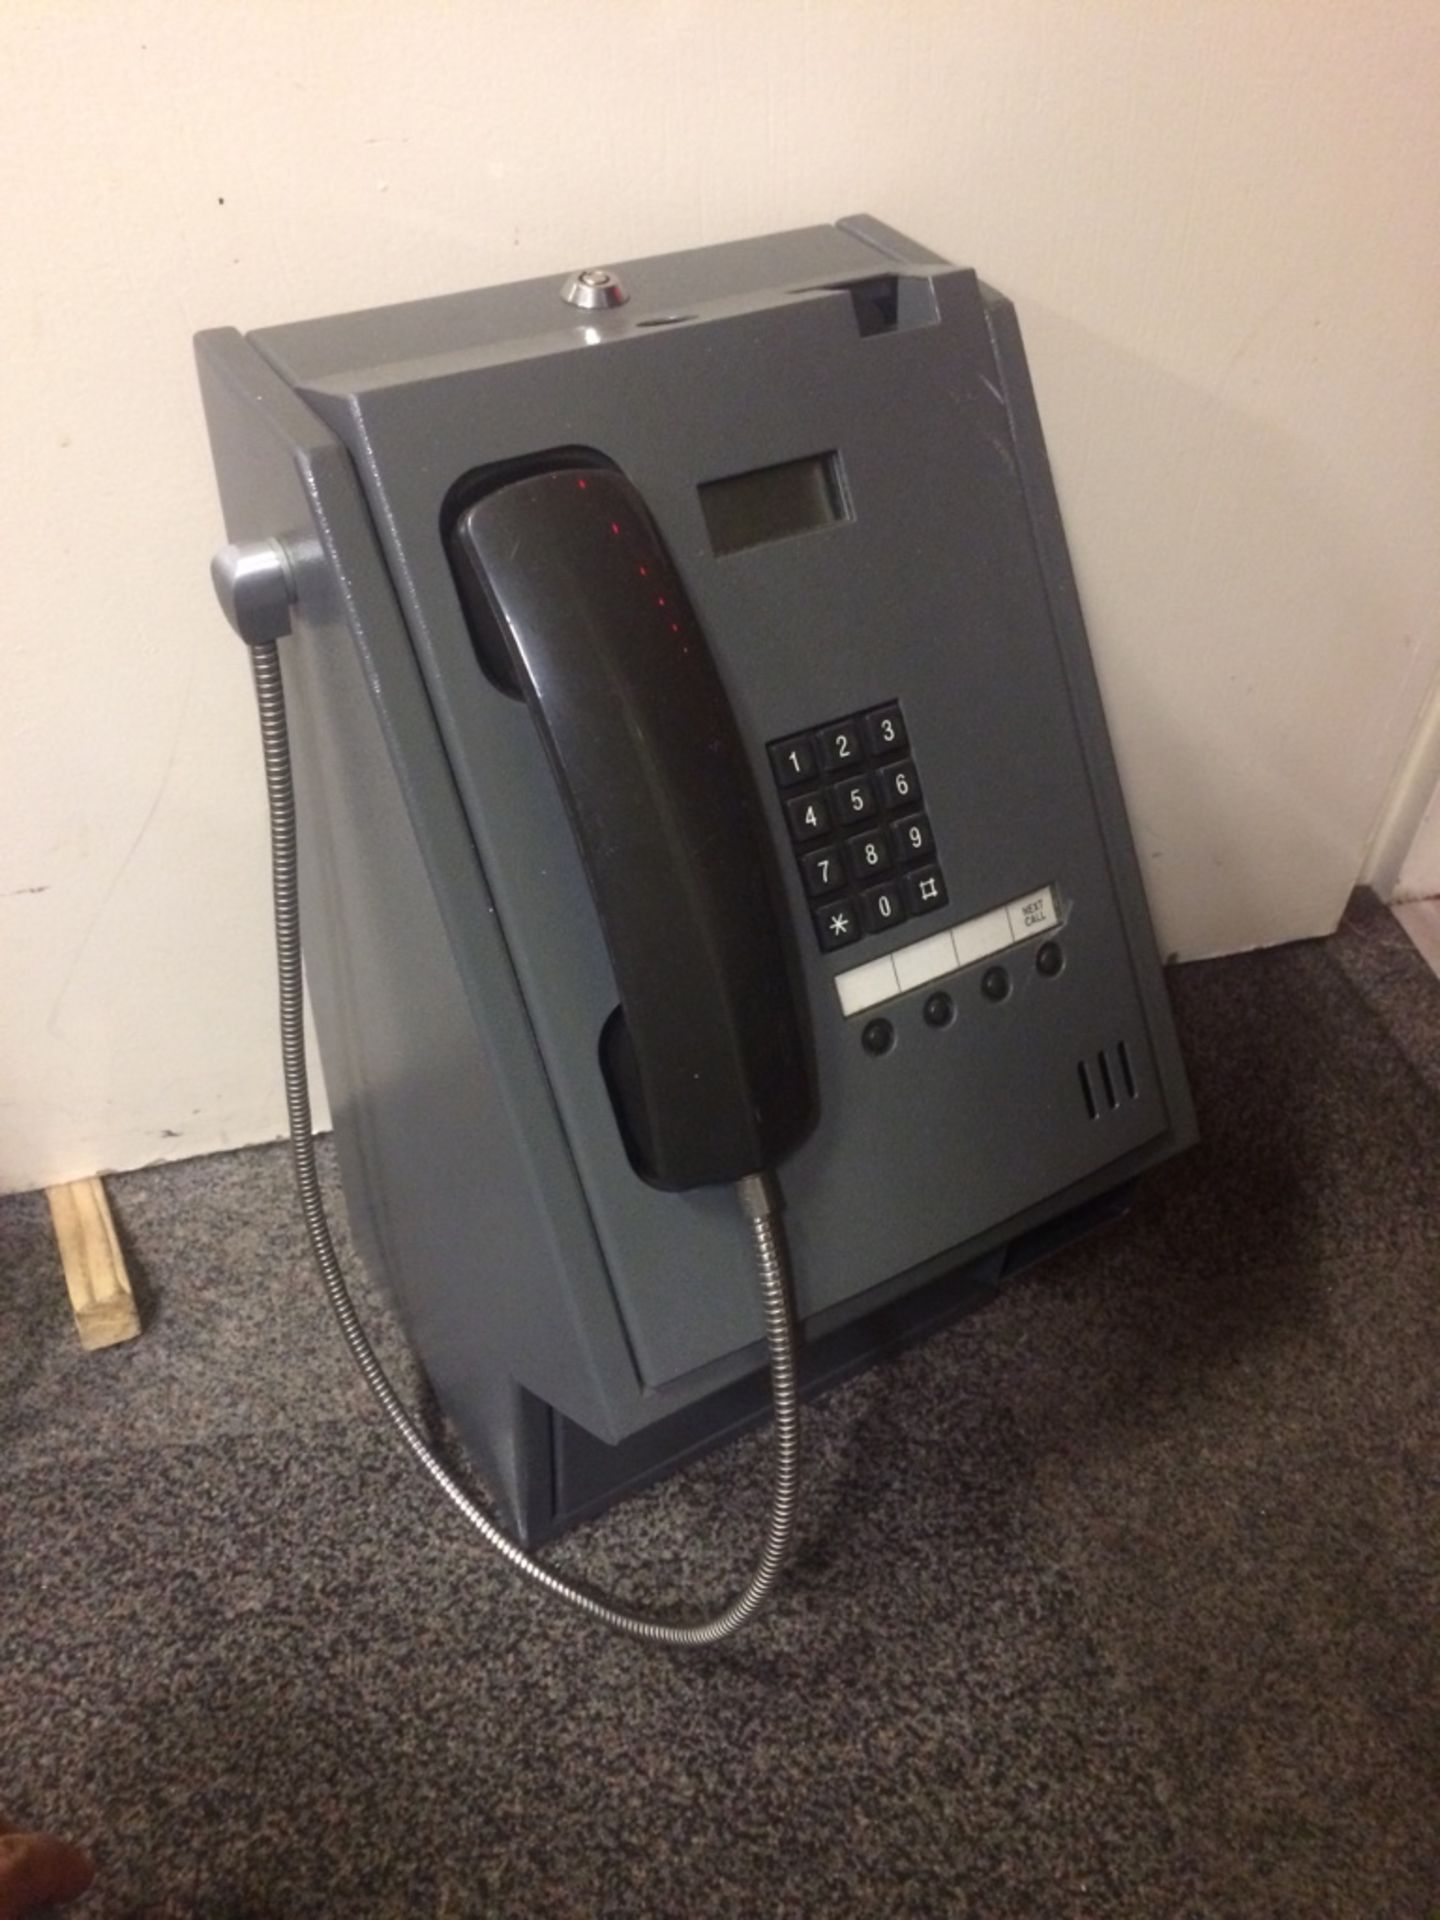 Bt Payphone PLEASE READ LOT 0 AS THE IMPORTANT INFORMATION DIFFERS FROM OUR USUAL AUCTIONS. - Image 2 of 4